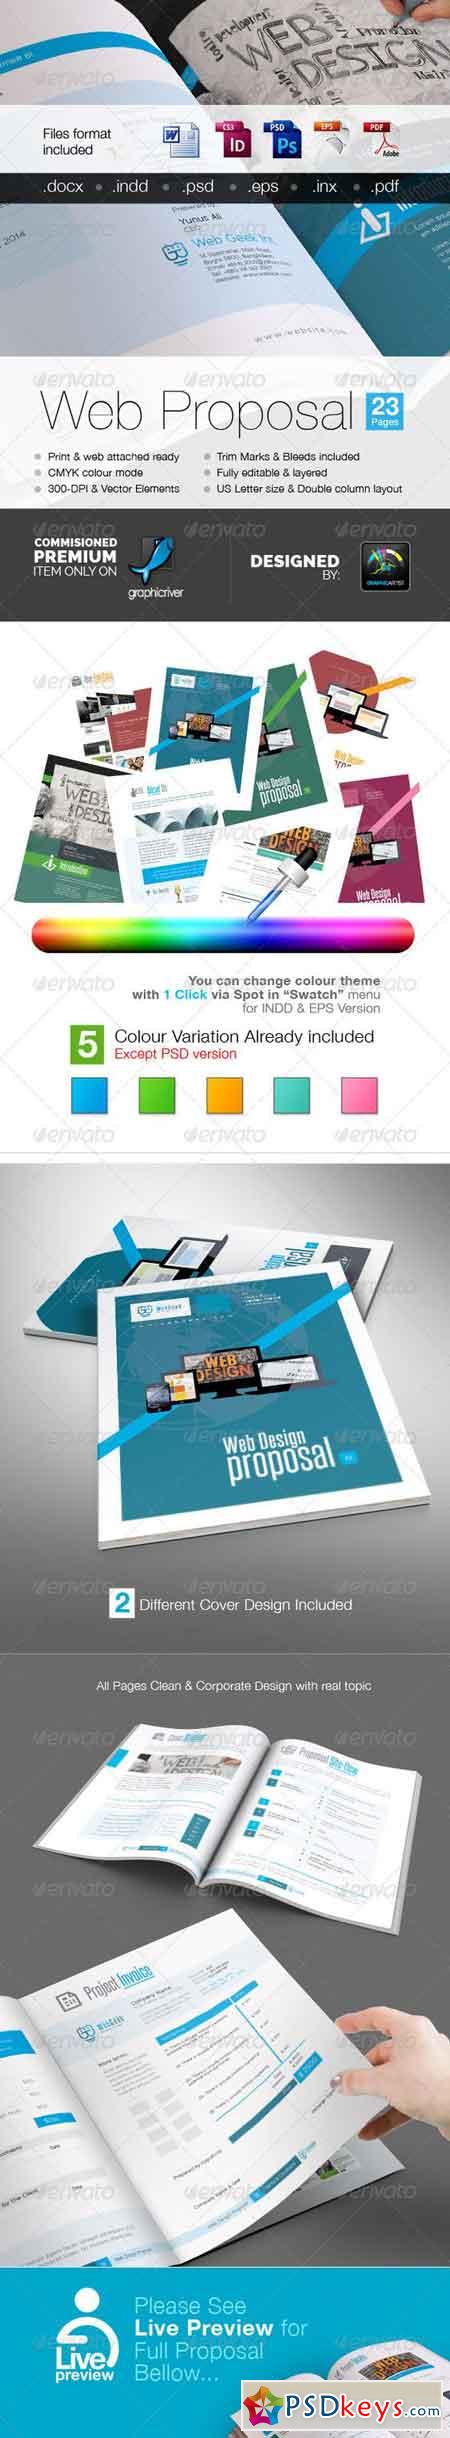 Web Proposal for Web Design Project 7259438